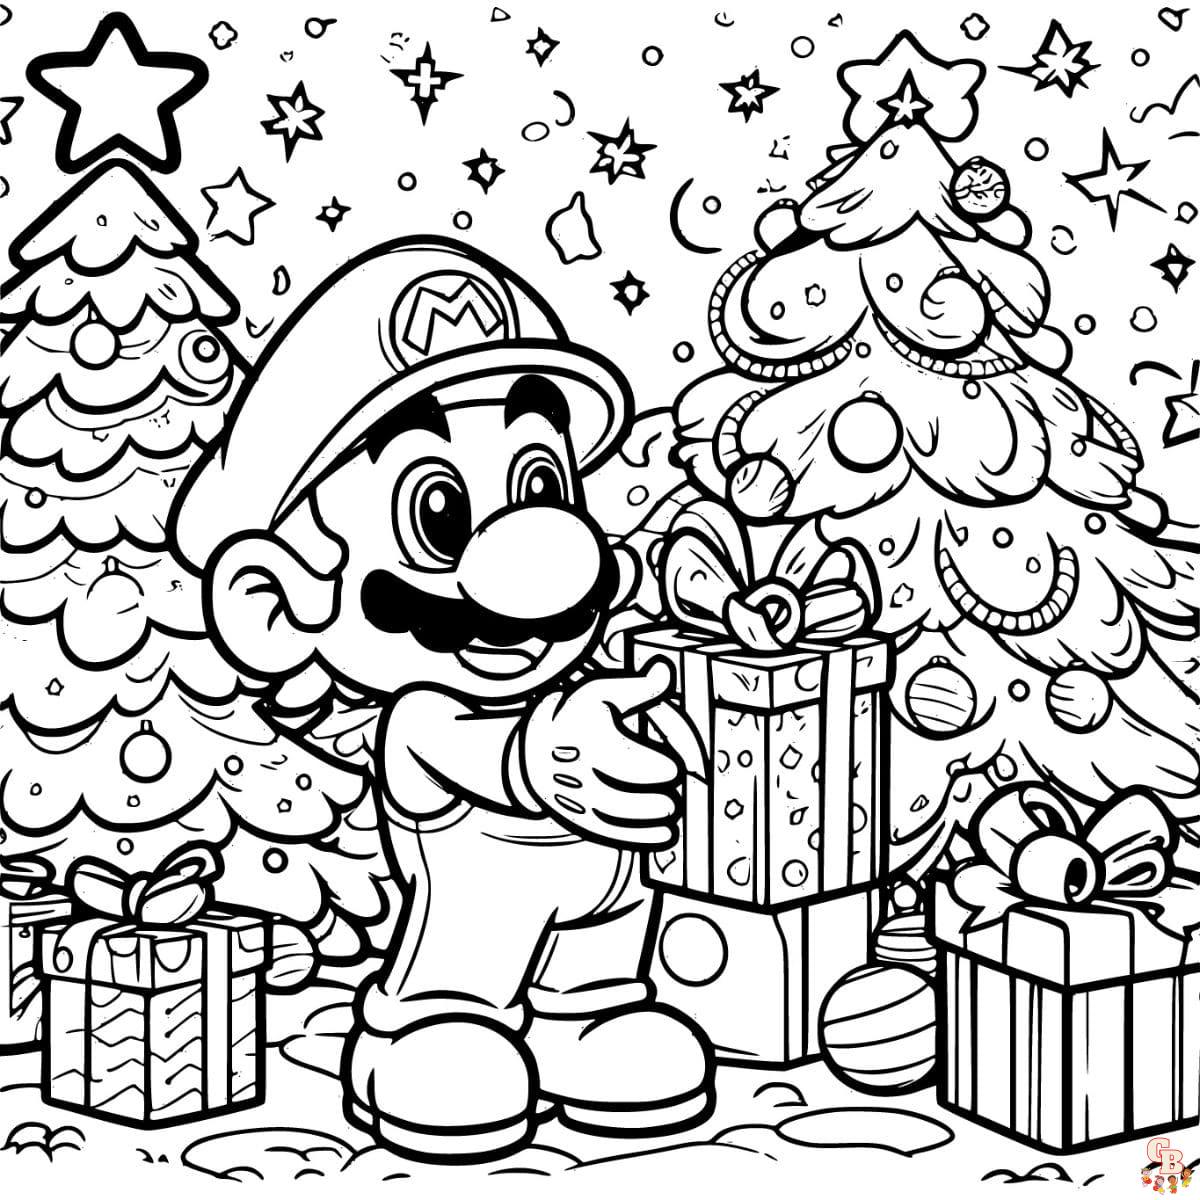 Mario with present coloring pages